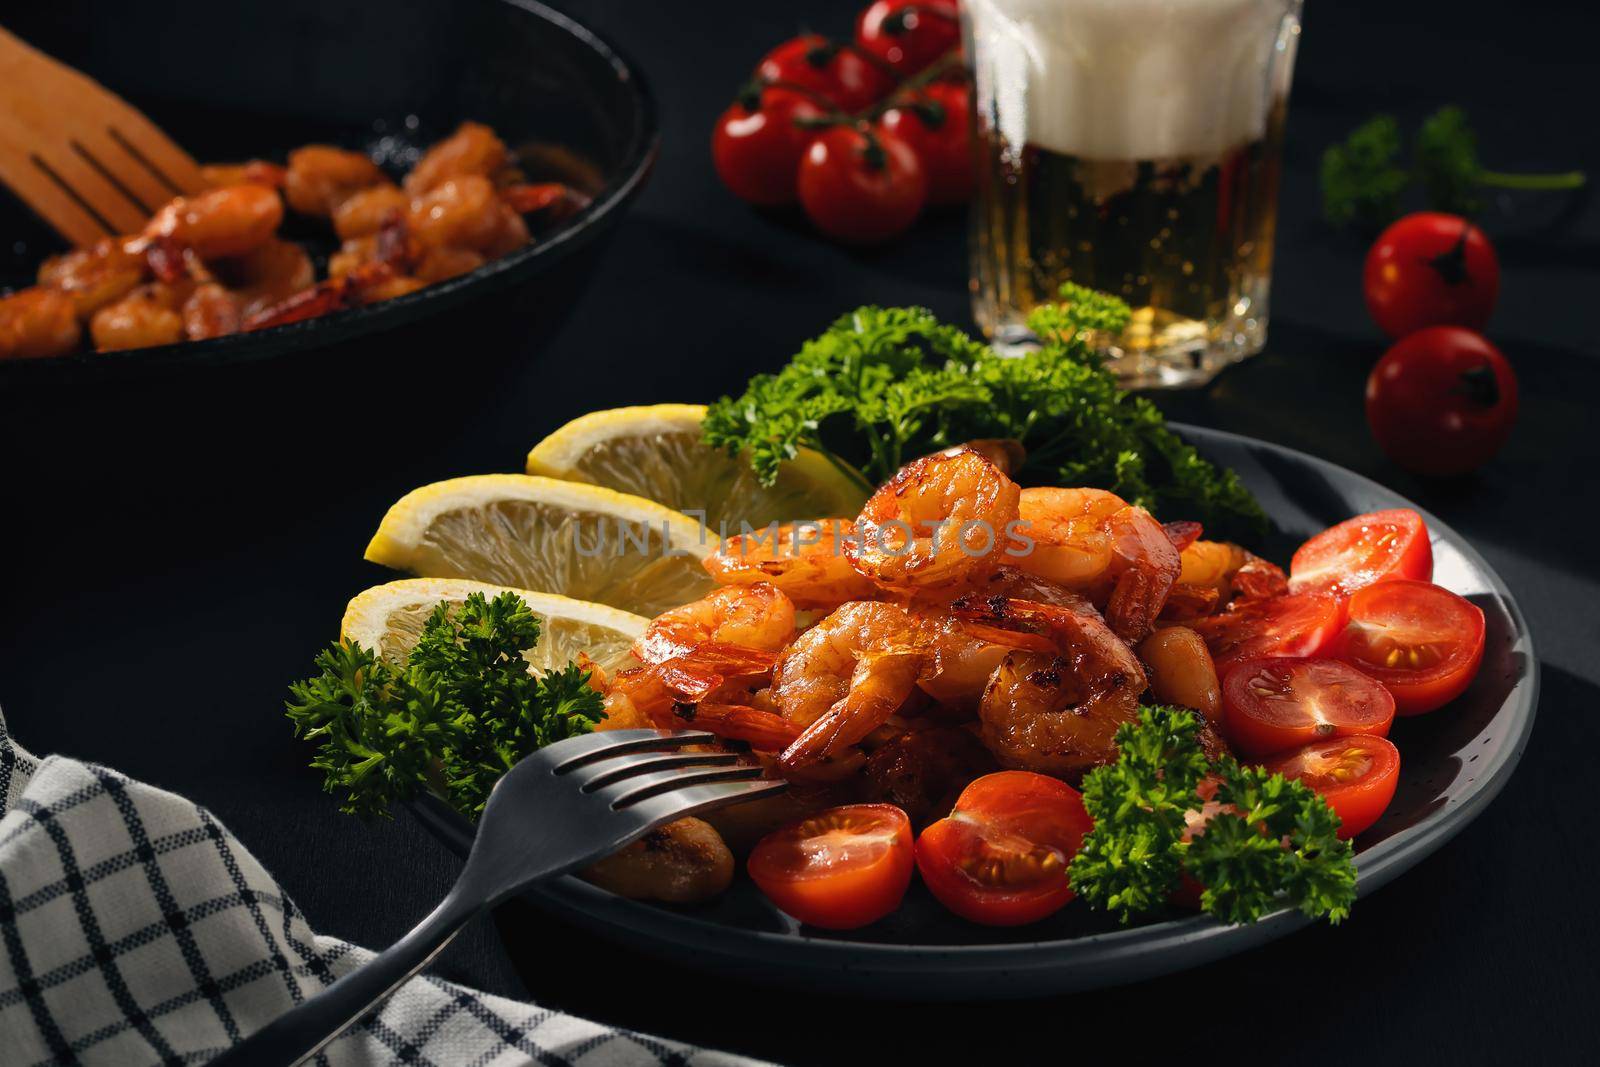 Served dinner - fried shrimp with lemon, tomatoes and herbs and beer in a glass on the table by galsand